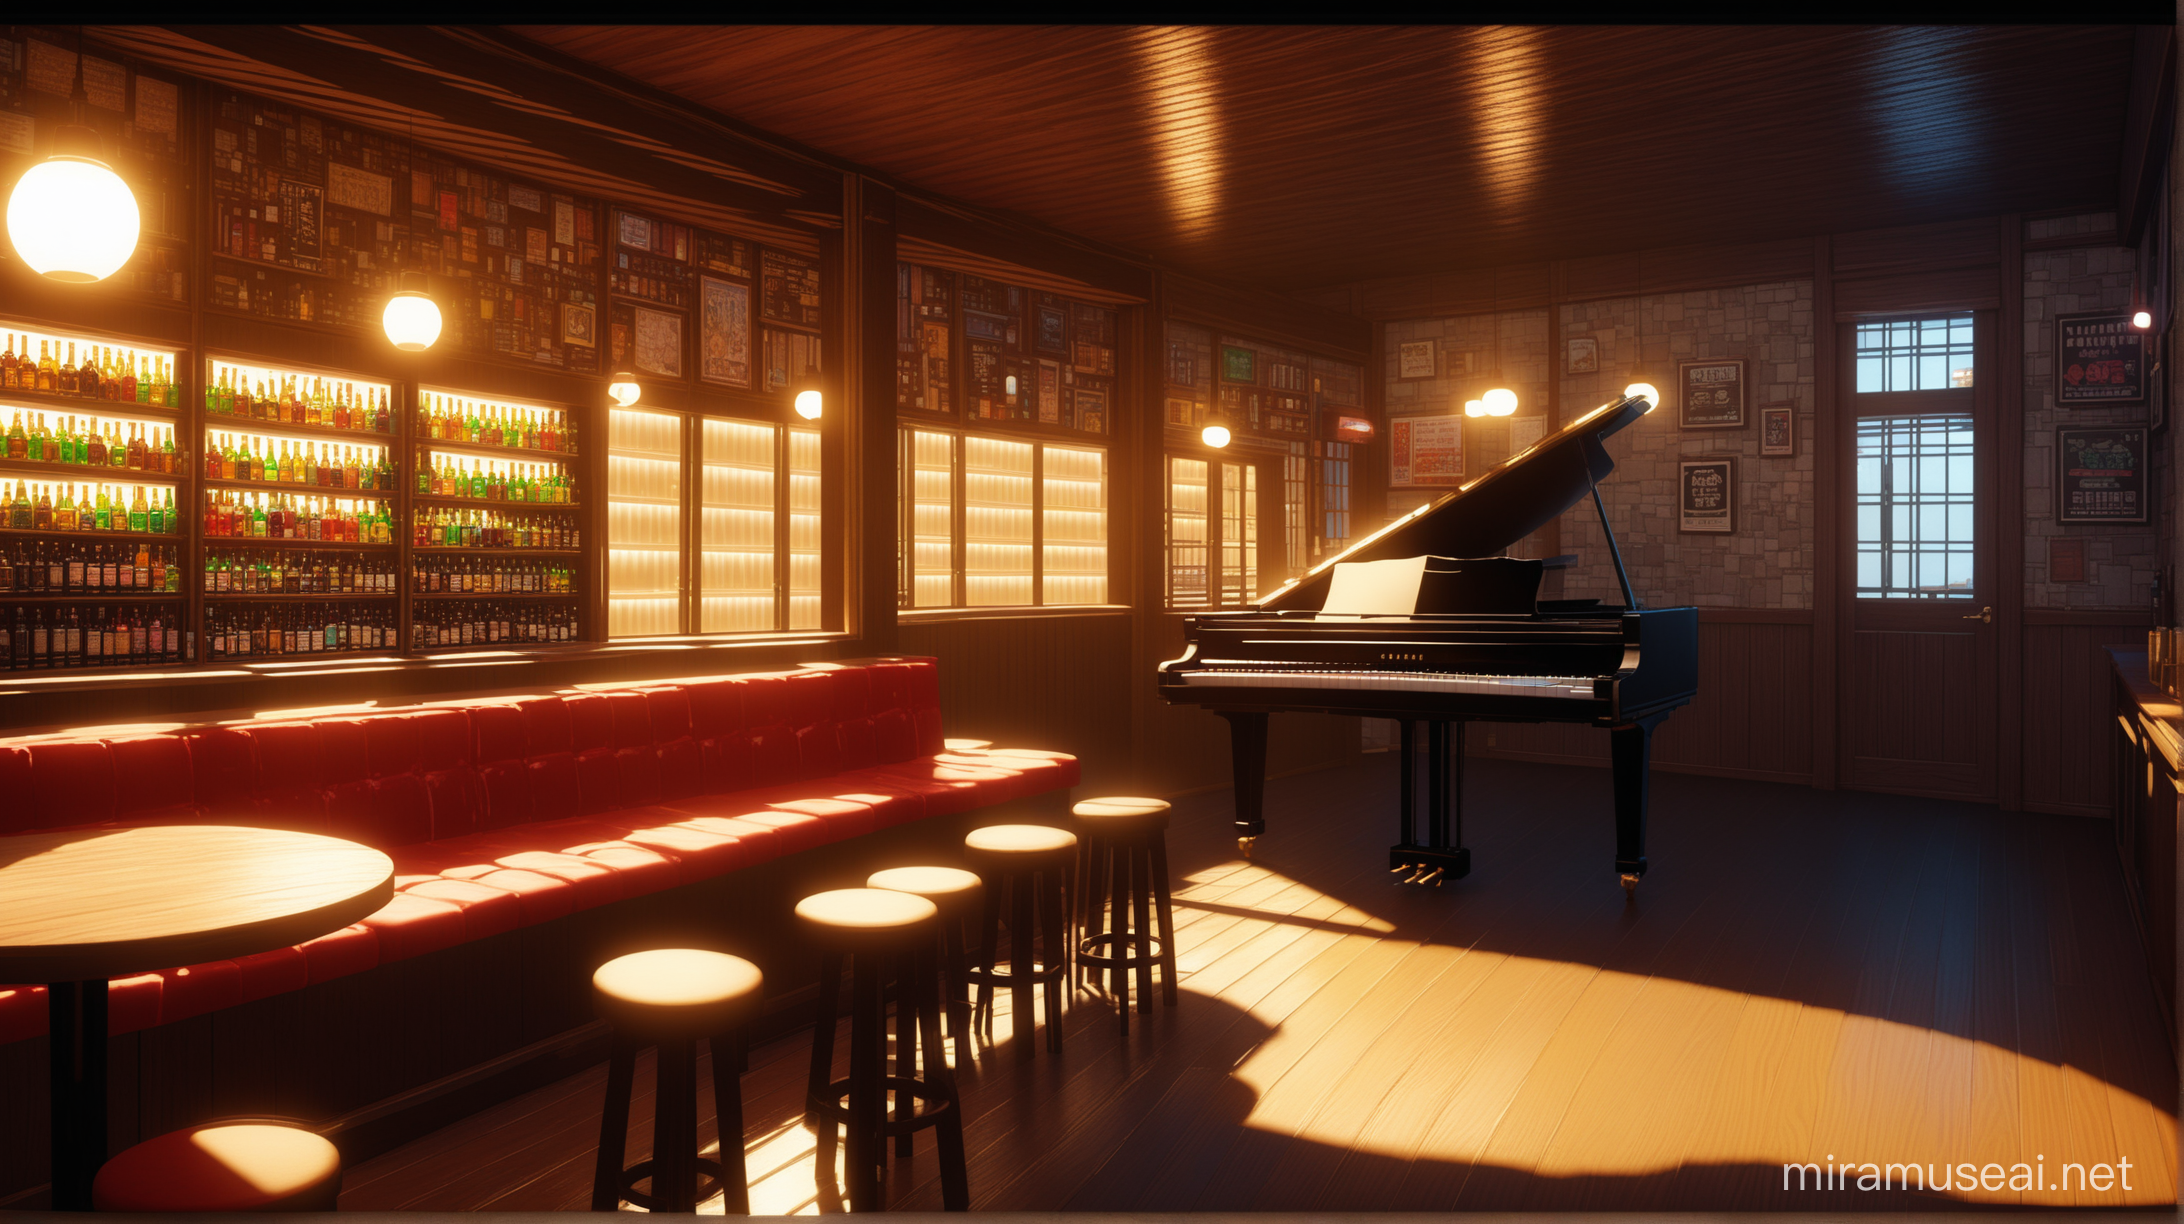 Painting in anime style of a Japanese jazz bar with piano in right third of a picture. Wooden floor, dim yellow light, cozy environment, bookshelves, couple round tables with bottles and ashtrays, a lot of wooden textures and furniture with red upholstery. Shadows, Rough, Shimmering, Lumen Reflections, Diffraction Grading, Chromatic Aberration, GB Displacement, Scan Lines, Ambient Occlusion, Anti - Aliasing, FKAA, TXAA, RTX, SSAO, OpenGL - Shader’s, Post Processing, Post - Production, Cell Shading, Tone Mapping, CGI, VFX, SFX, insanely detailed and intricate, hyper maximalist, elegant, dynamic pose, photography, volumetric, ultra - detailed, intricate details, super detailed, ambient